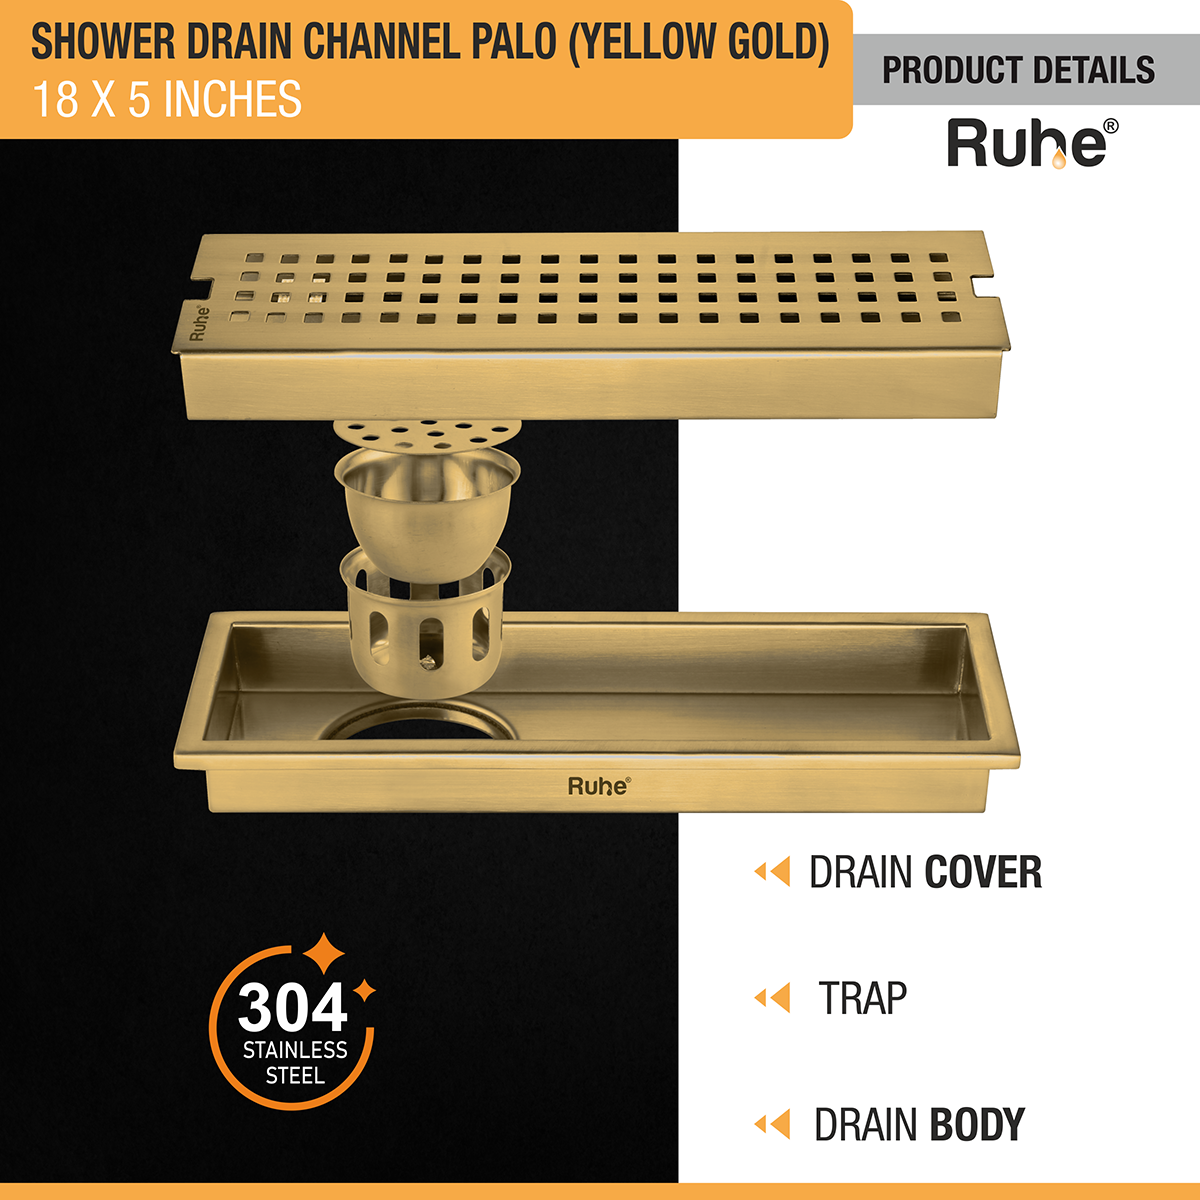 Palo Shower Drain Channel (18 x 5 Inches) YELLOW GOLD product details